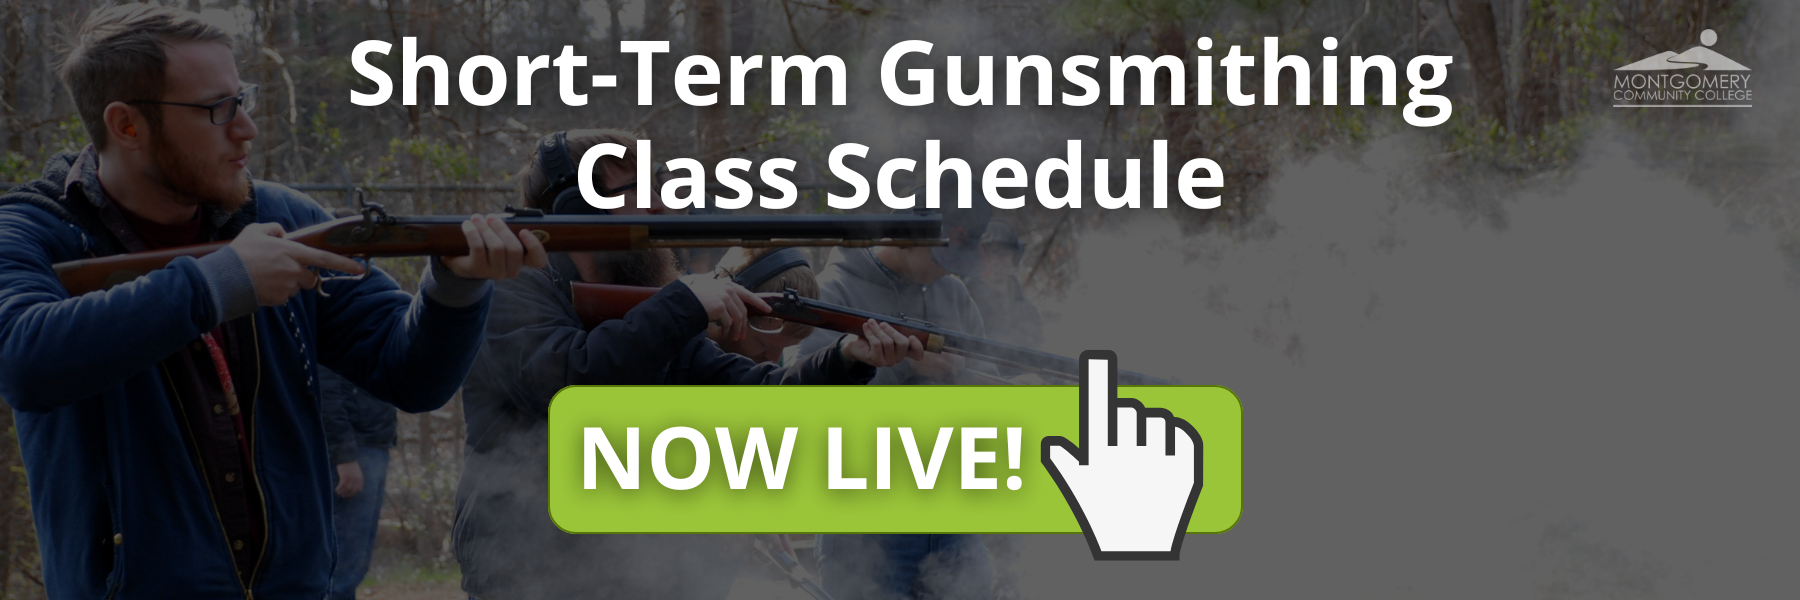 2023 NRA Short Term Class Schedule. Now Live! Students shooting guns in background